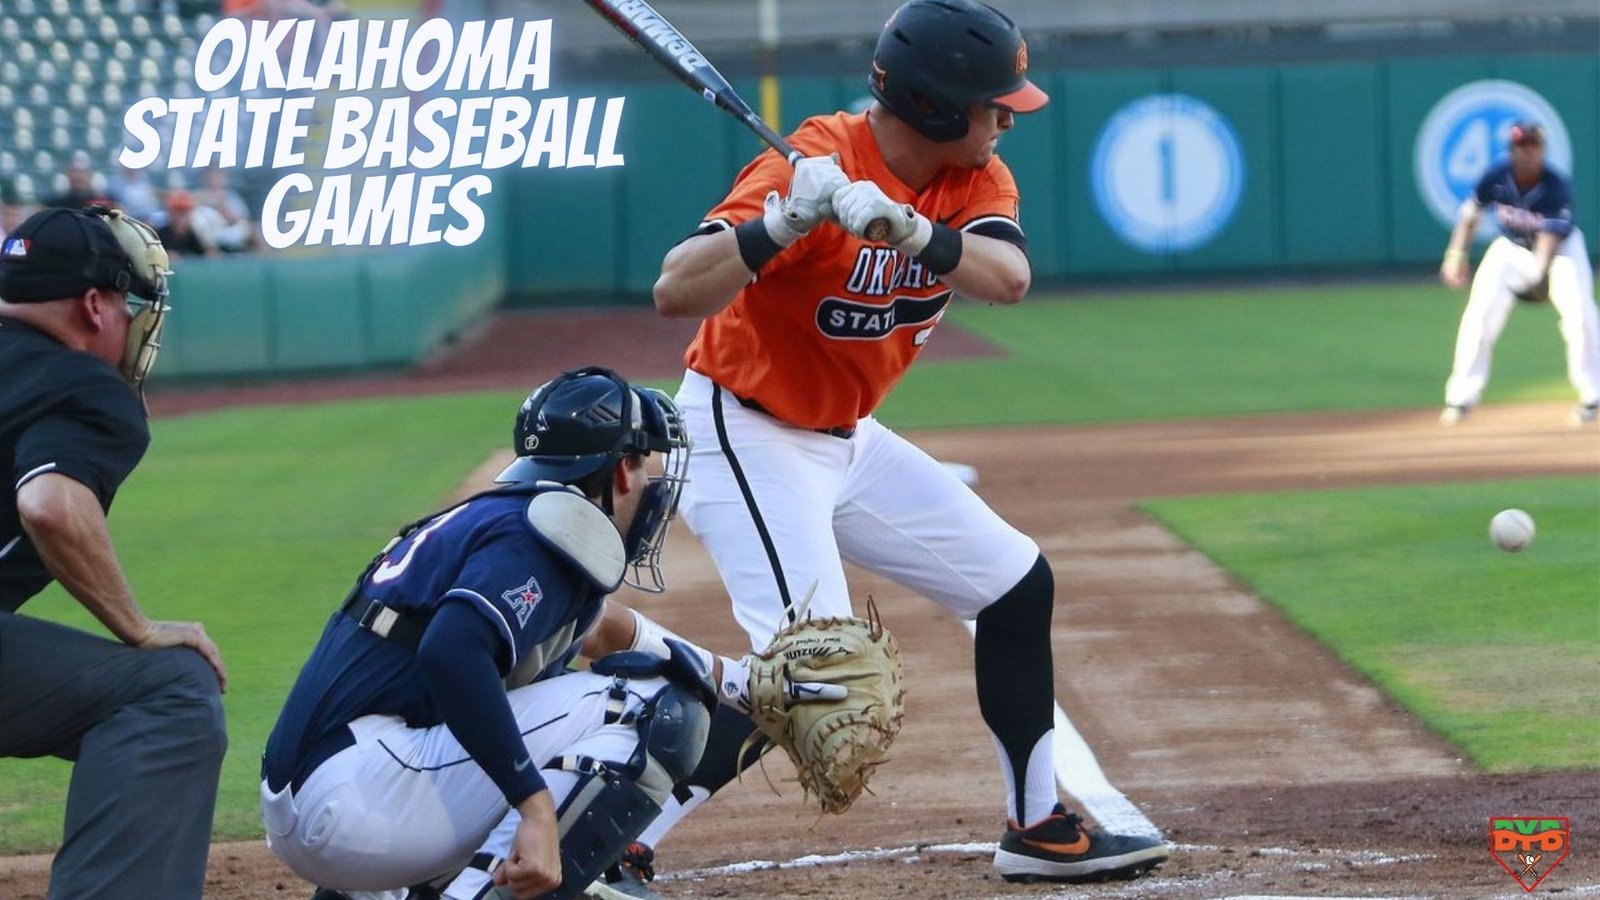 Stay UptoDate with Live Scores of Oklahoma State Baseball Games